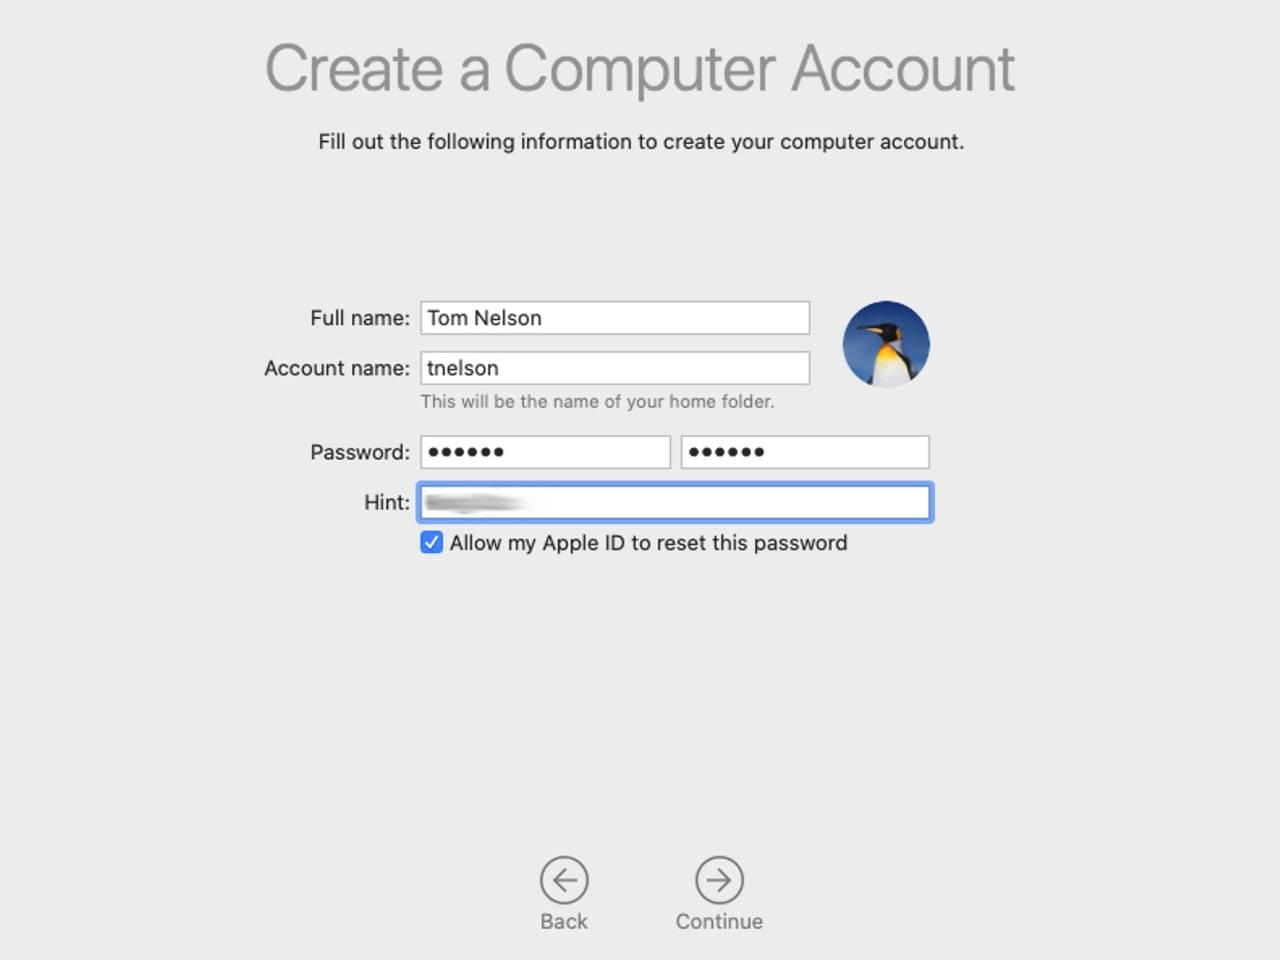 Enter the information to create an administrator account on your Mac.